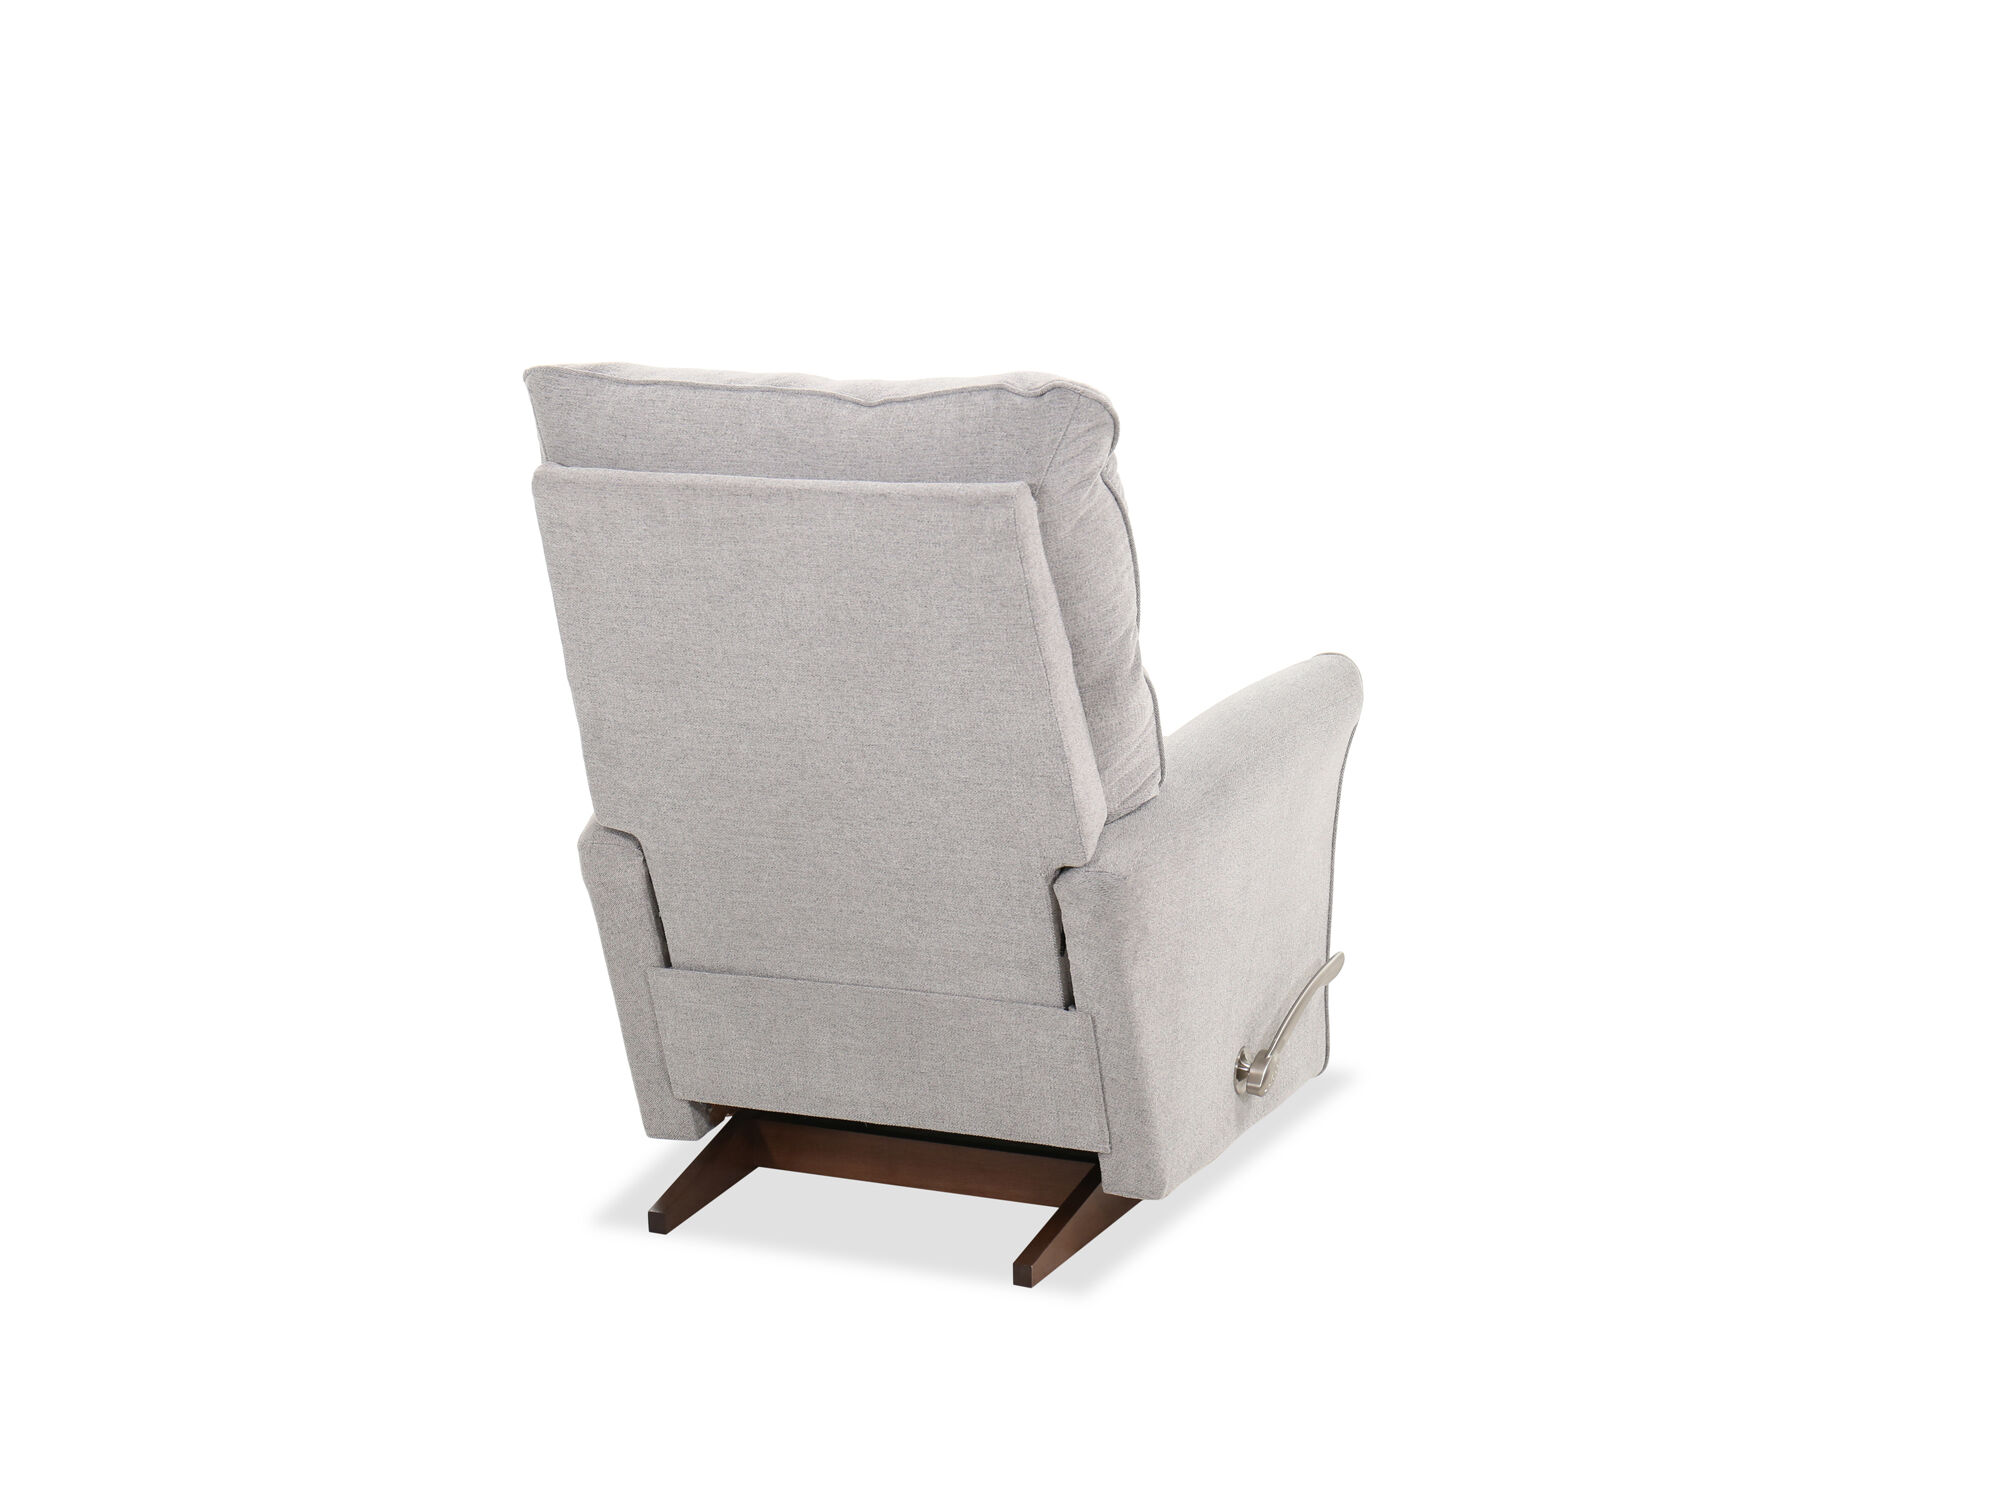 mathis brothers lazy boy recliner sale